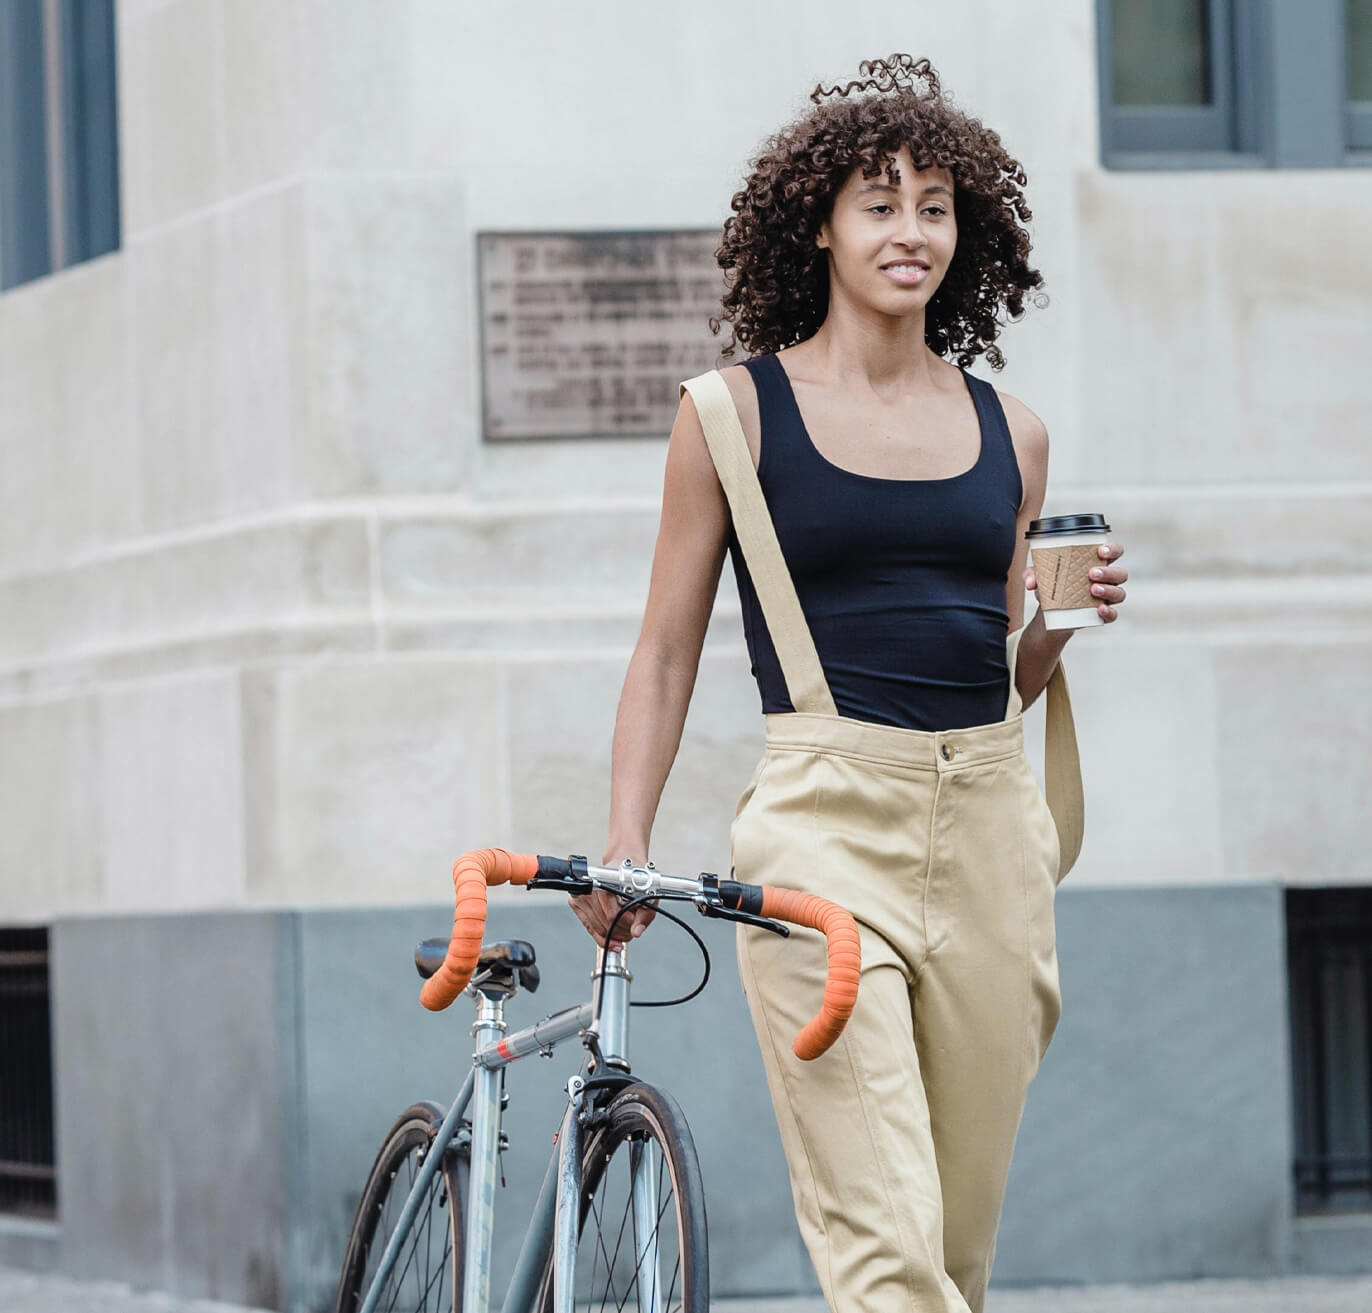 A woman walking holding her bike and a coffee.